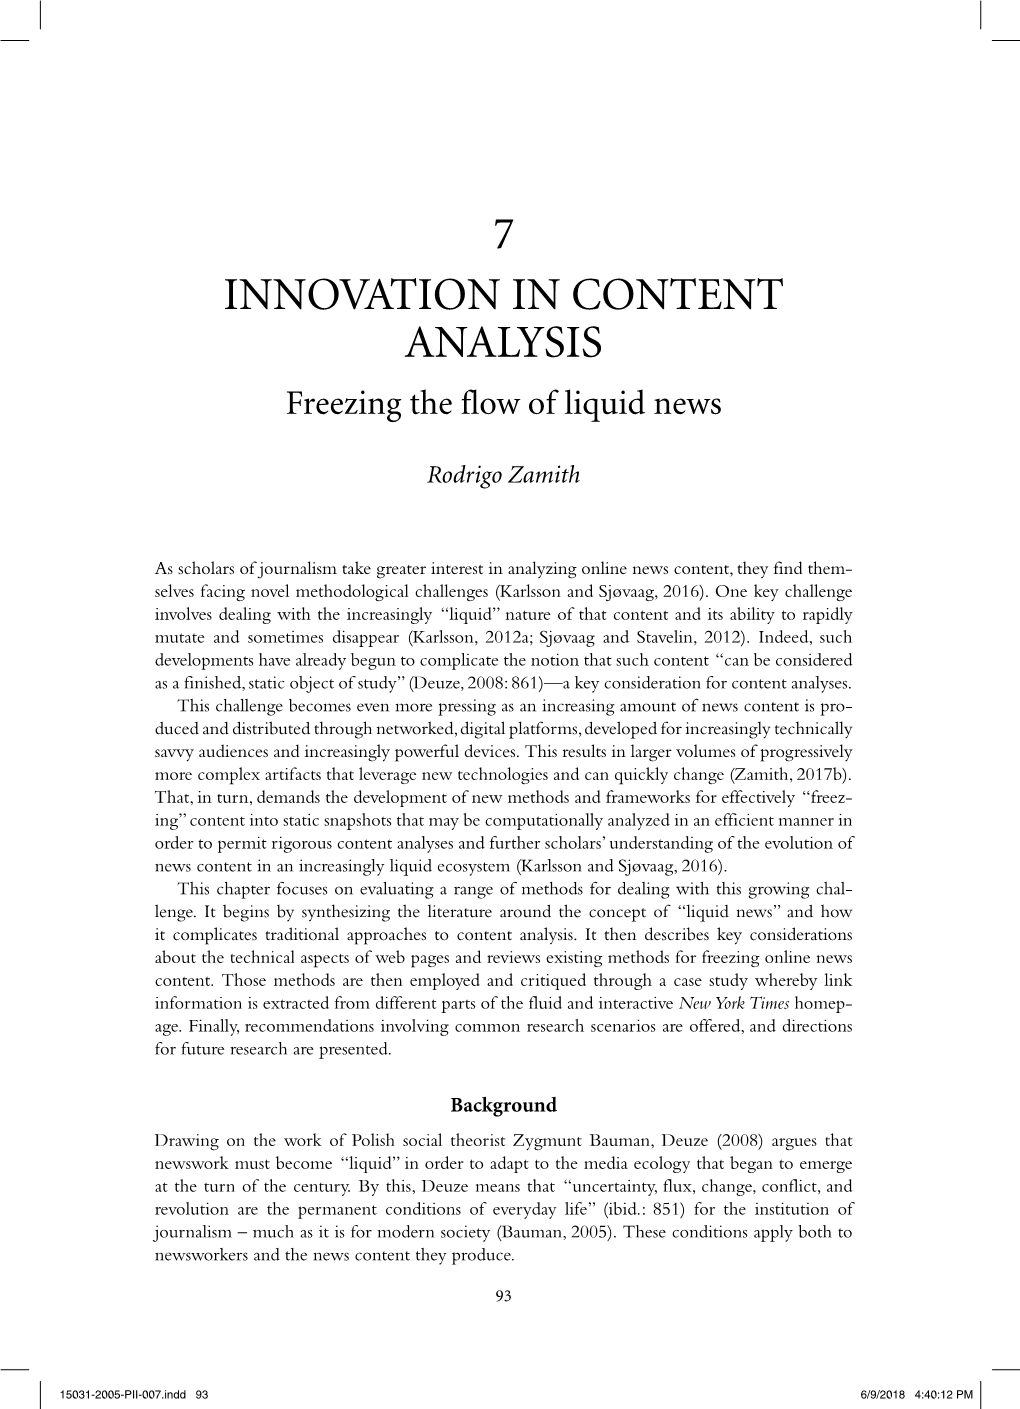 7 INNOVATION in CONTENT ANALYSIS Freezing the Flow of Liquid News